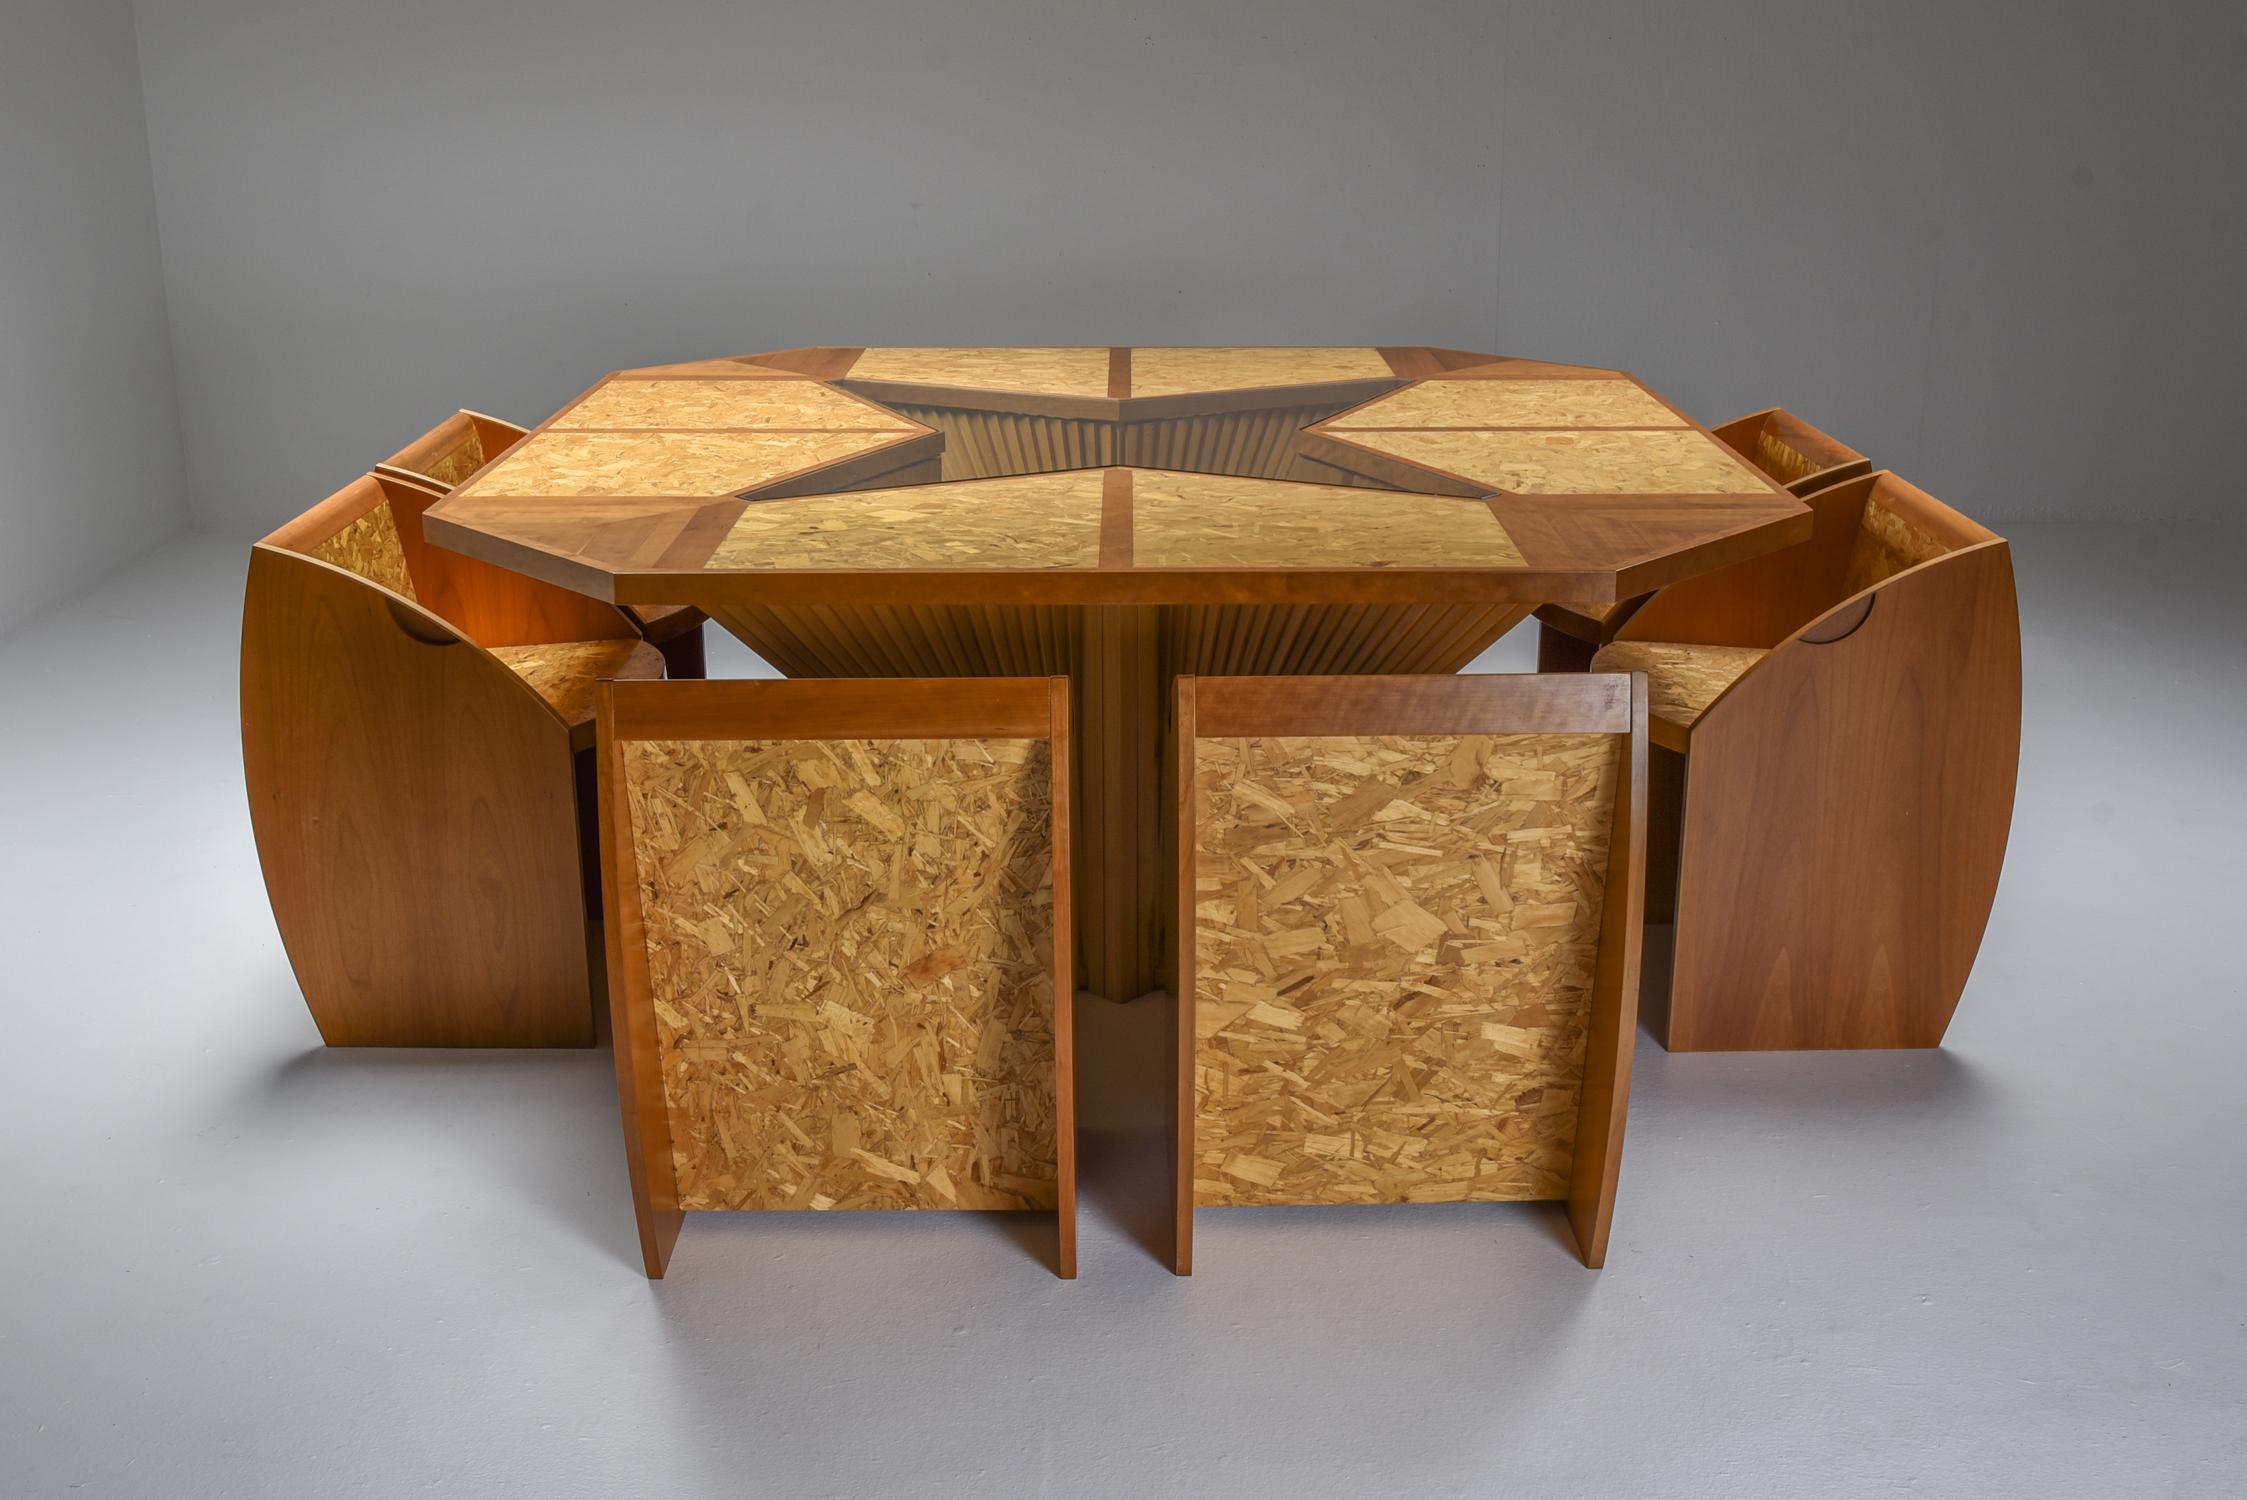 Mid-Century Modern; Hollywood Regency; dining set; Italian design; 1970's, Vivai del Sud inspired. 

Custom one-of-a-Kind dining set with a lot of precious material patterns creating this true conversation piece for your dining area.